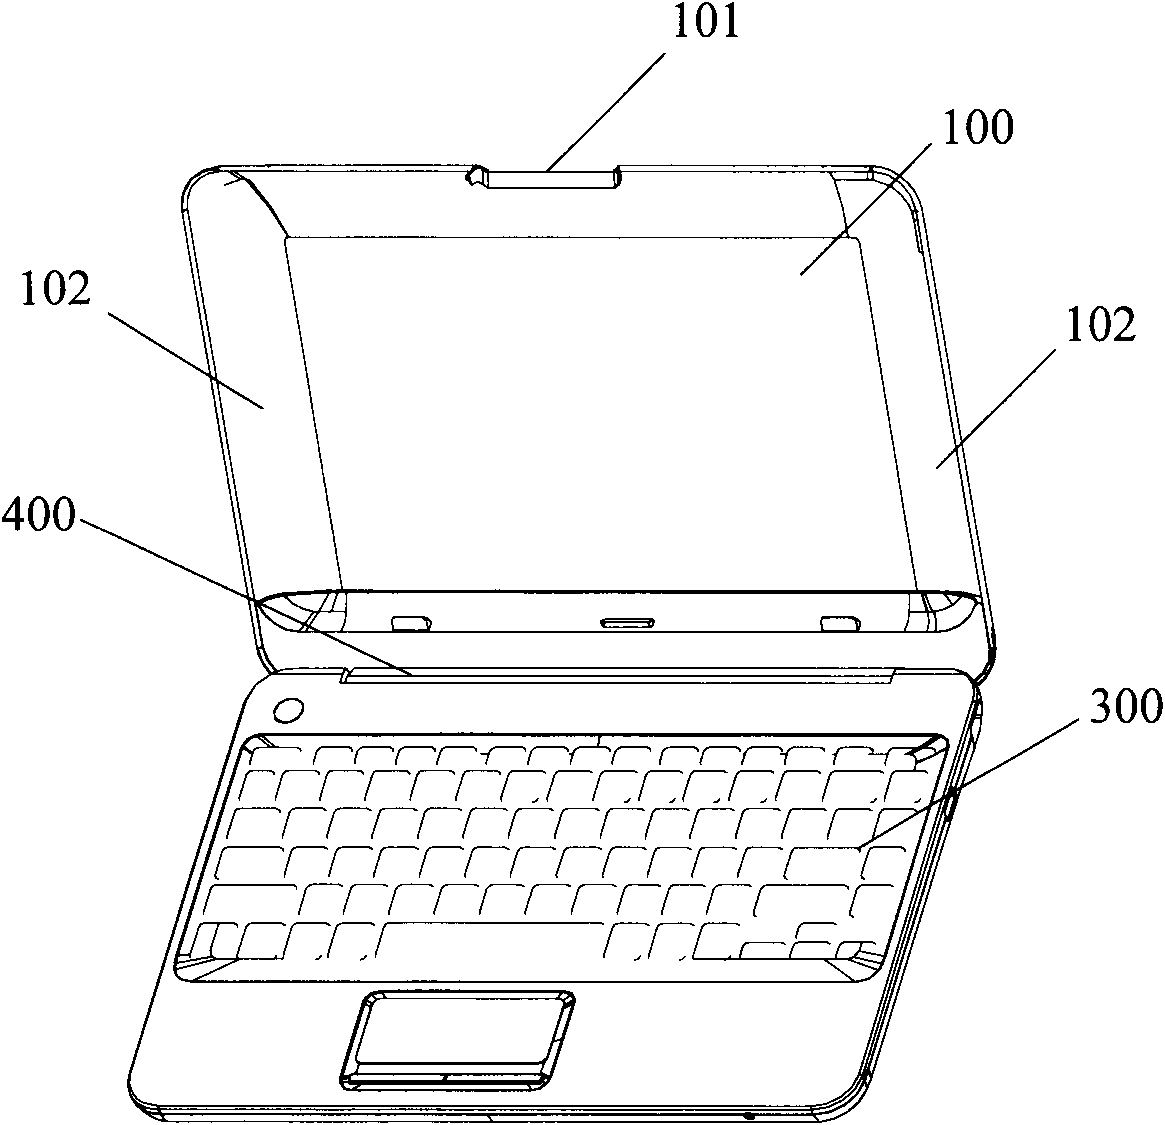 Computer assembly